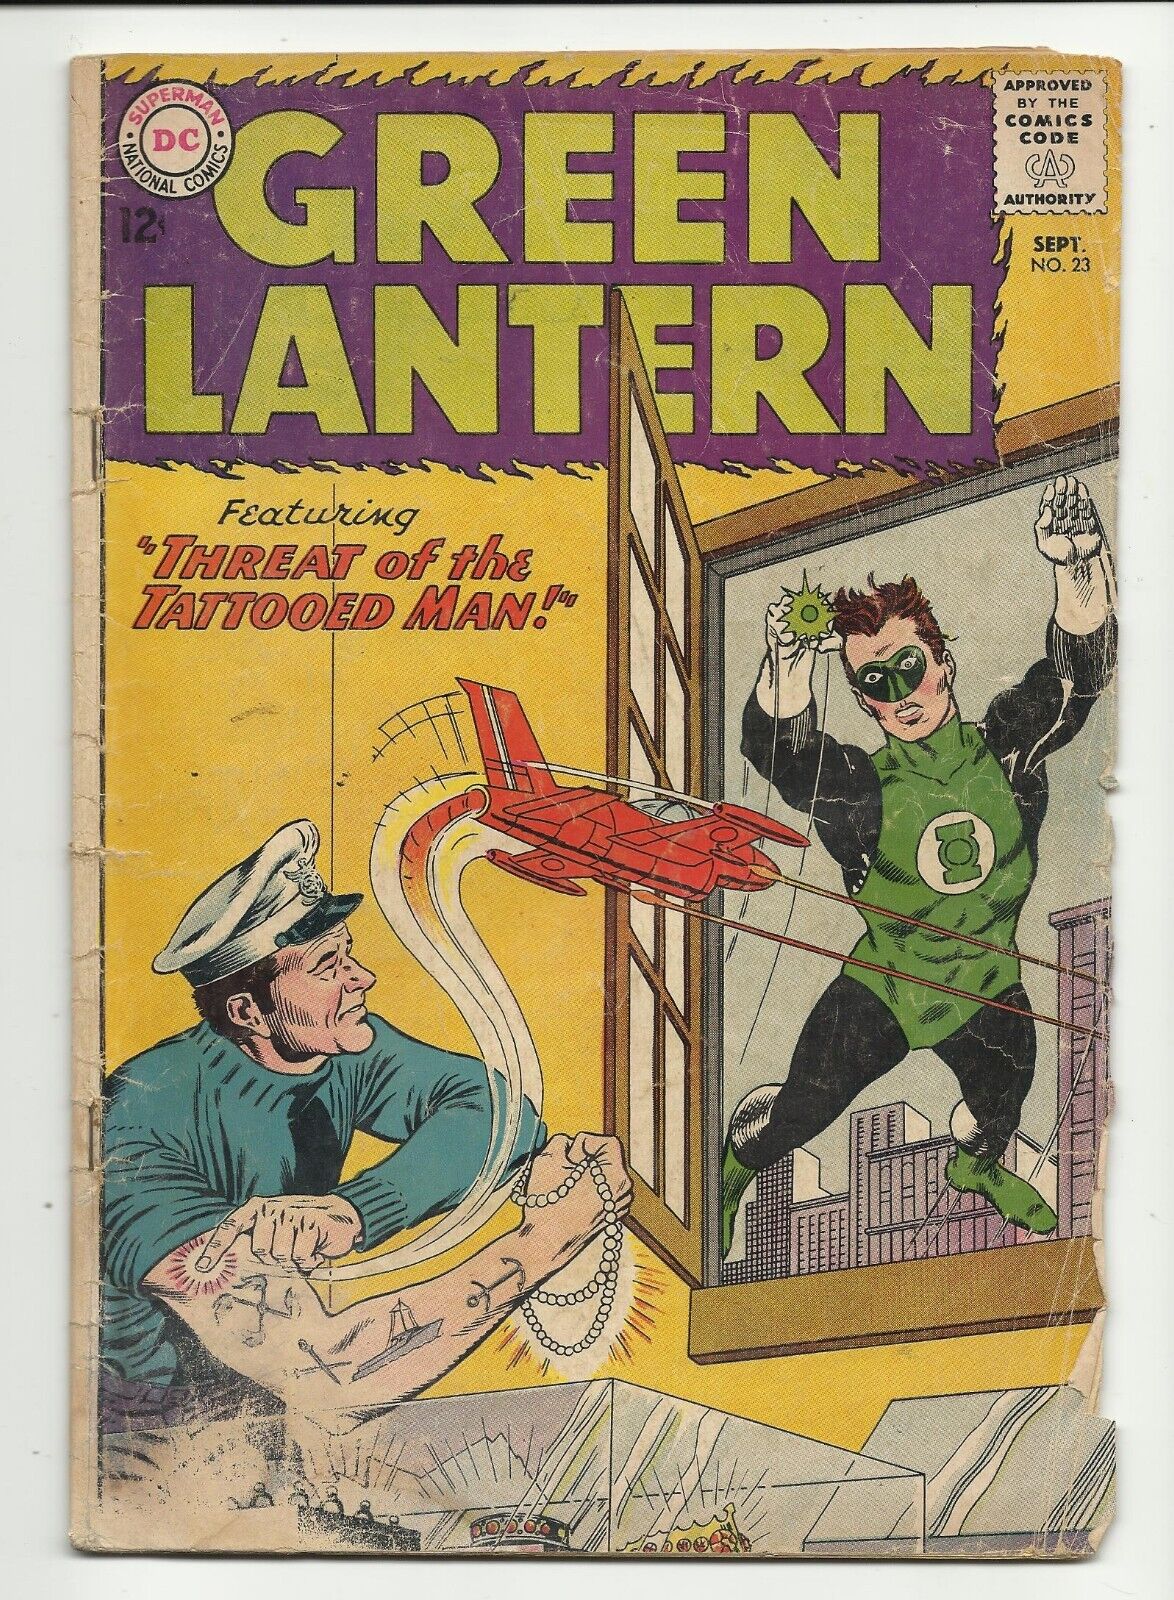 Green Lantern #23 - 1st appearance of Tattooed Man - DC Silver Age - GD 2.0